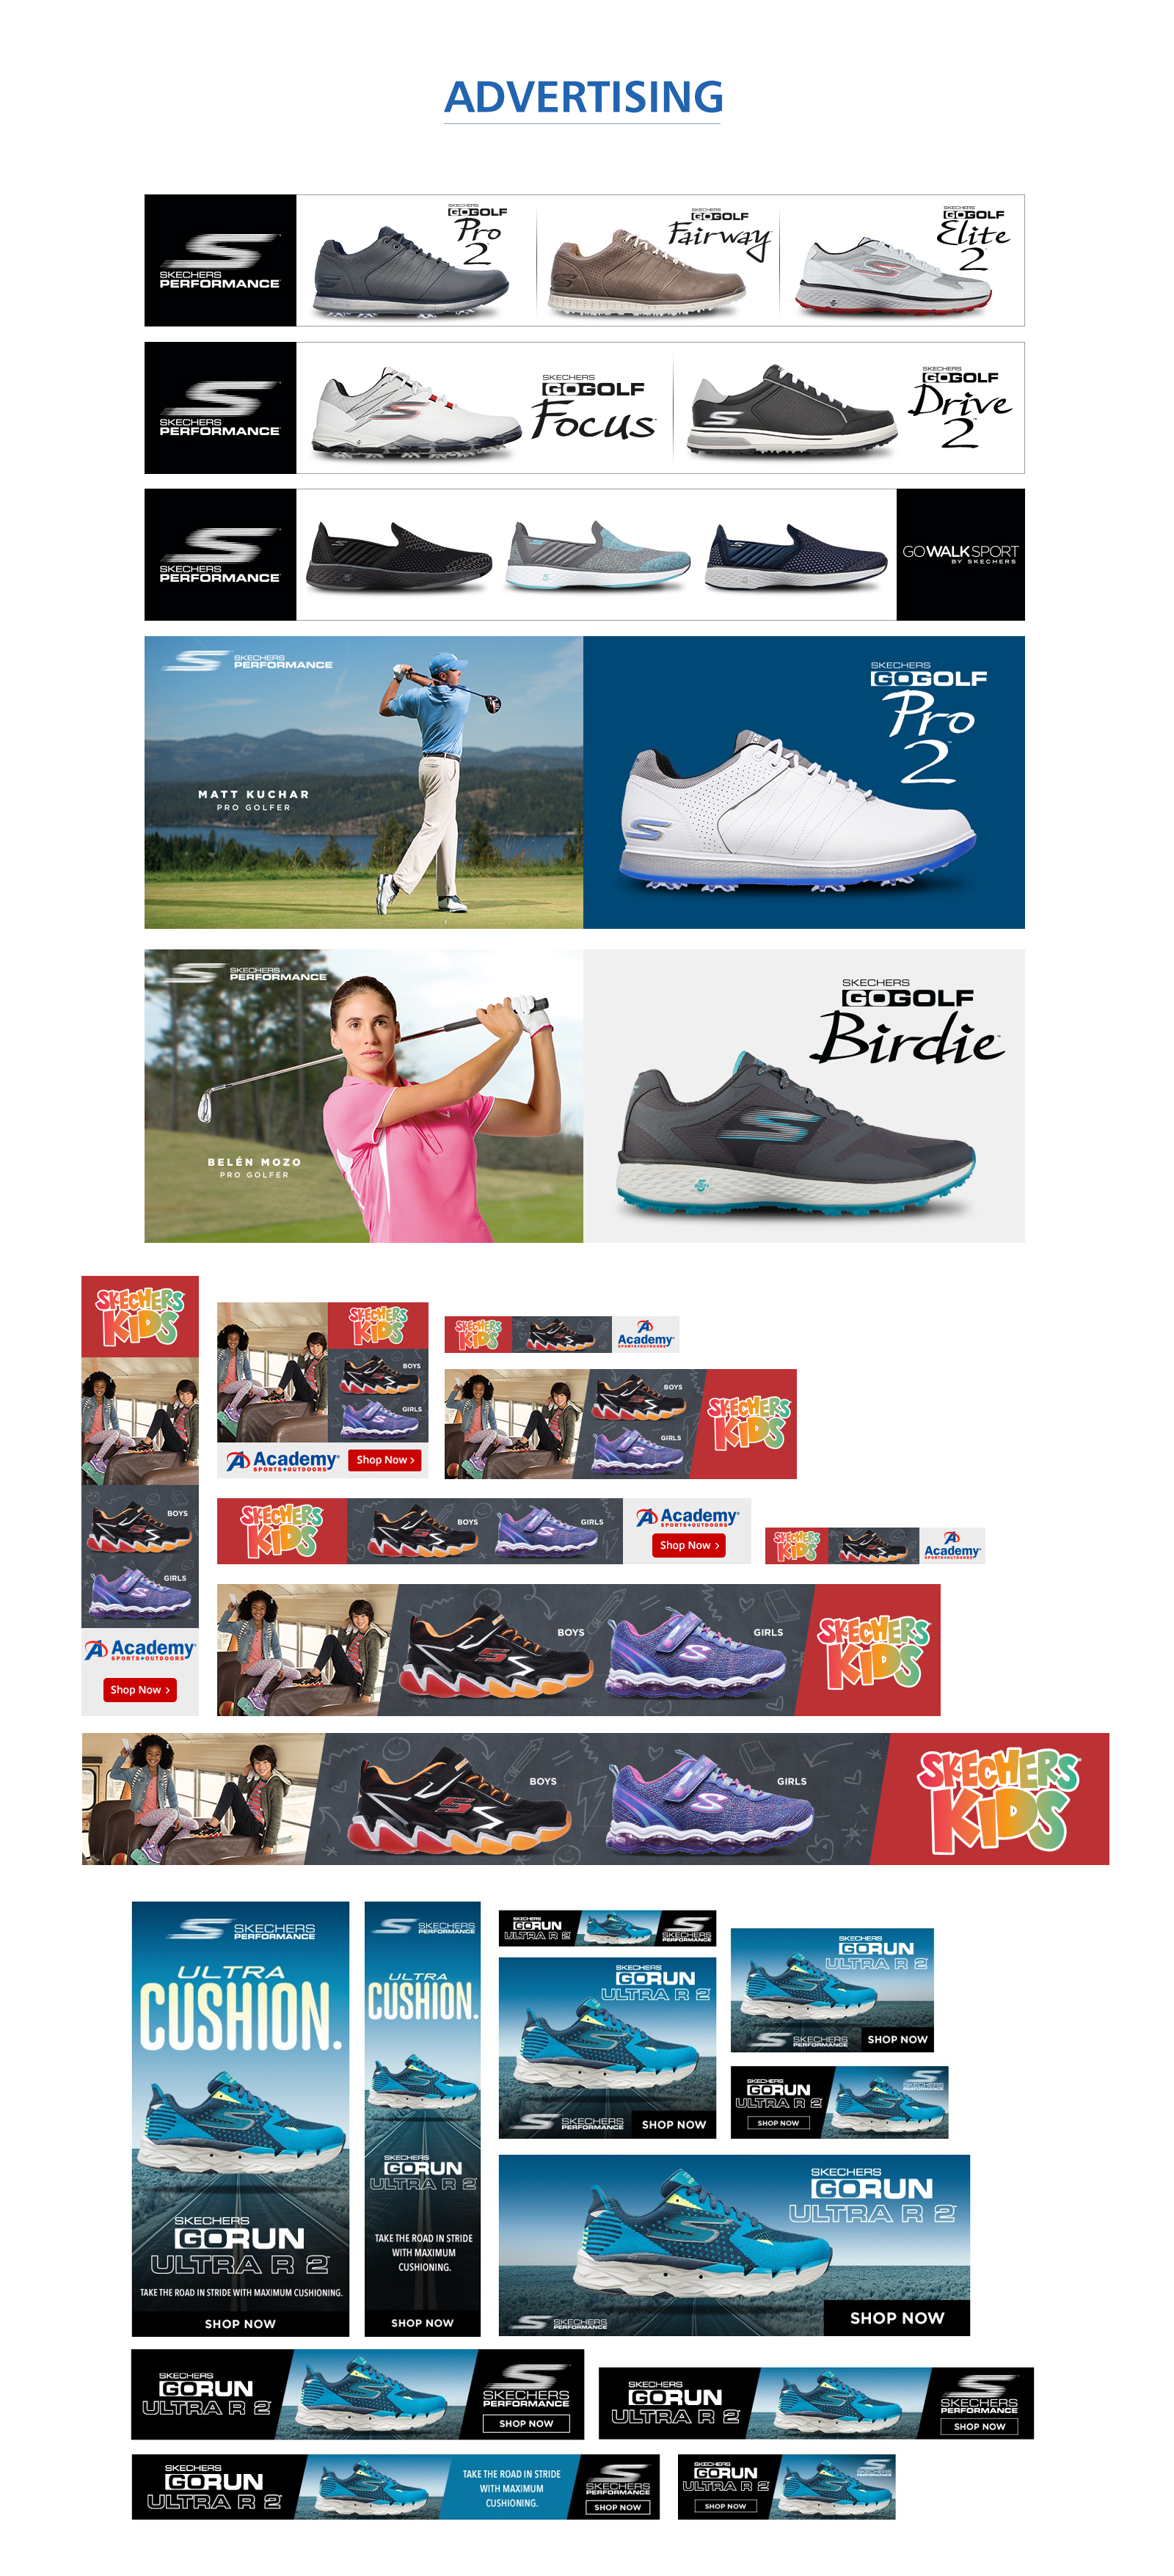 skechers home page